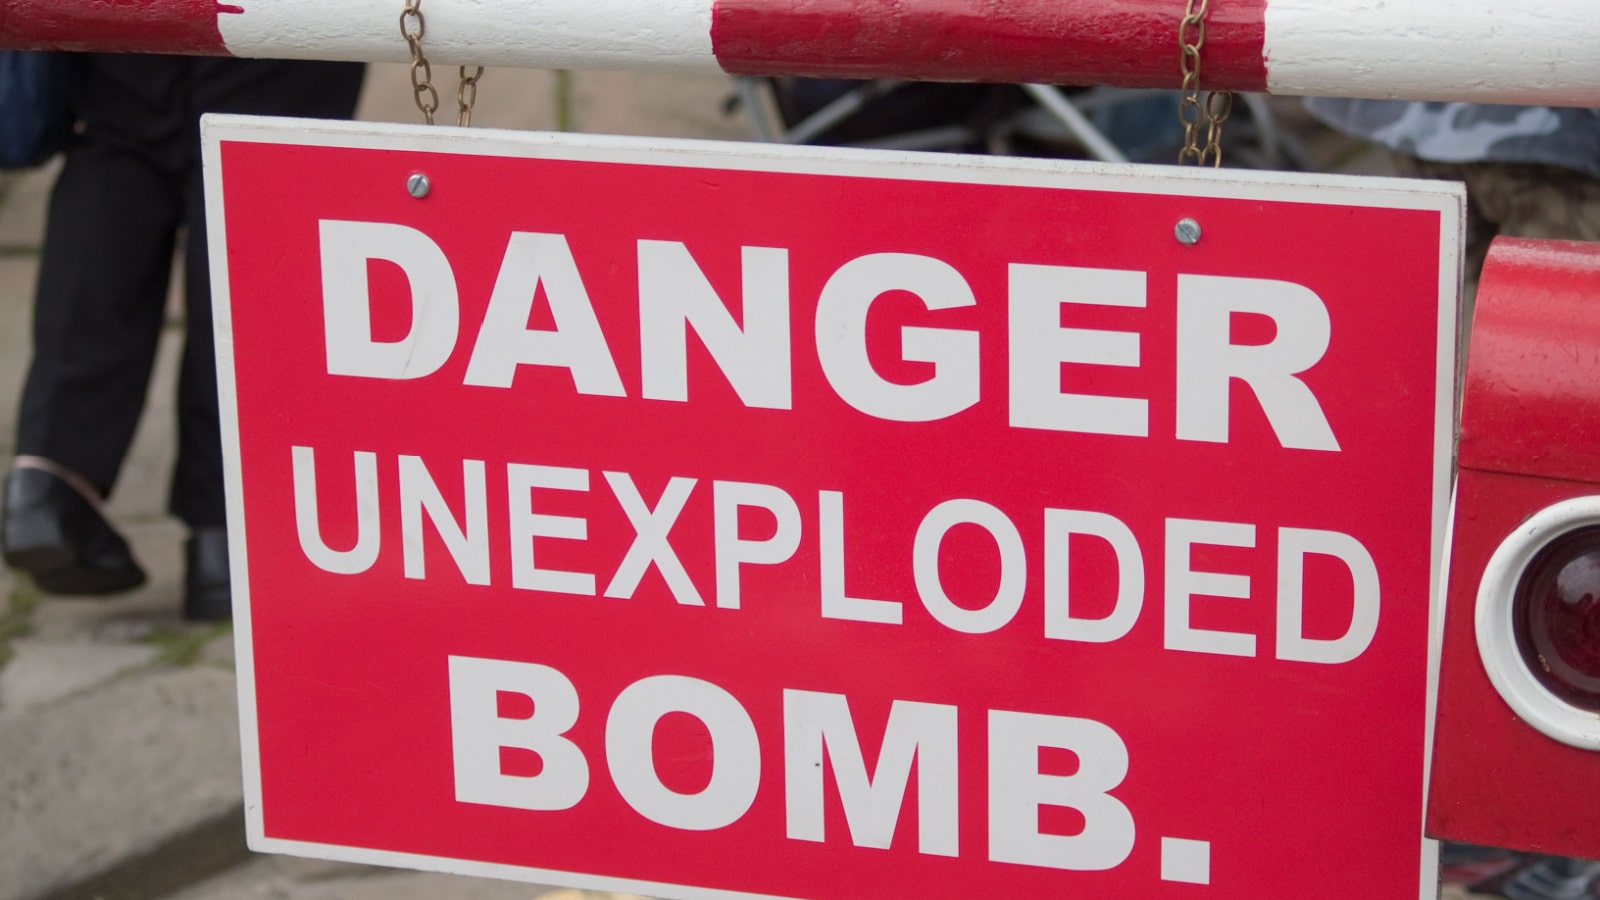 Danger unexploded bomb sign at a wartime reenactment event in the UK.